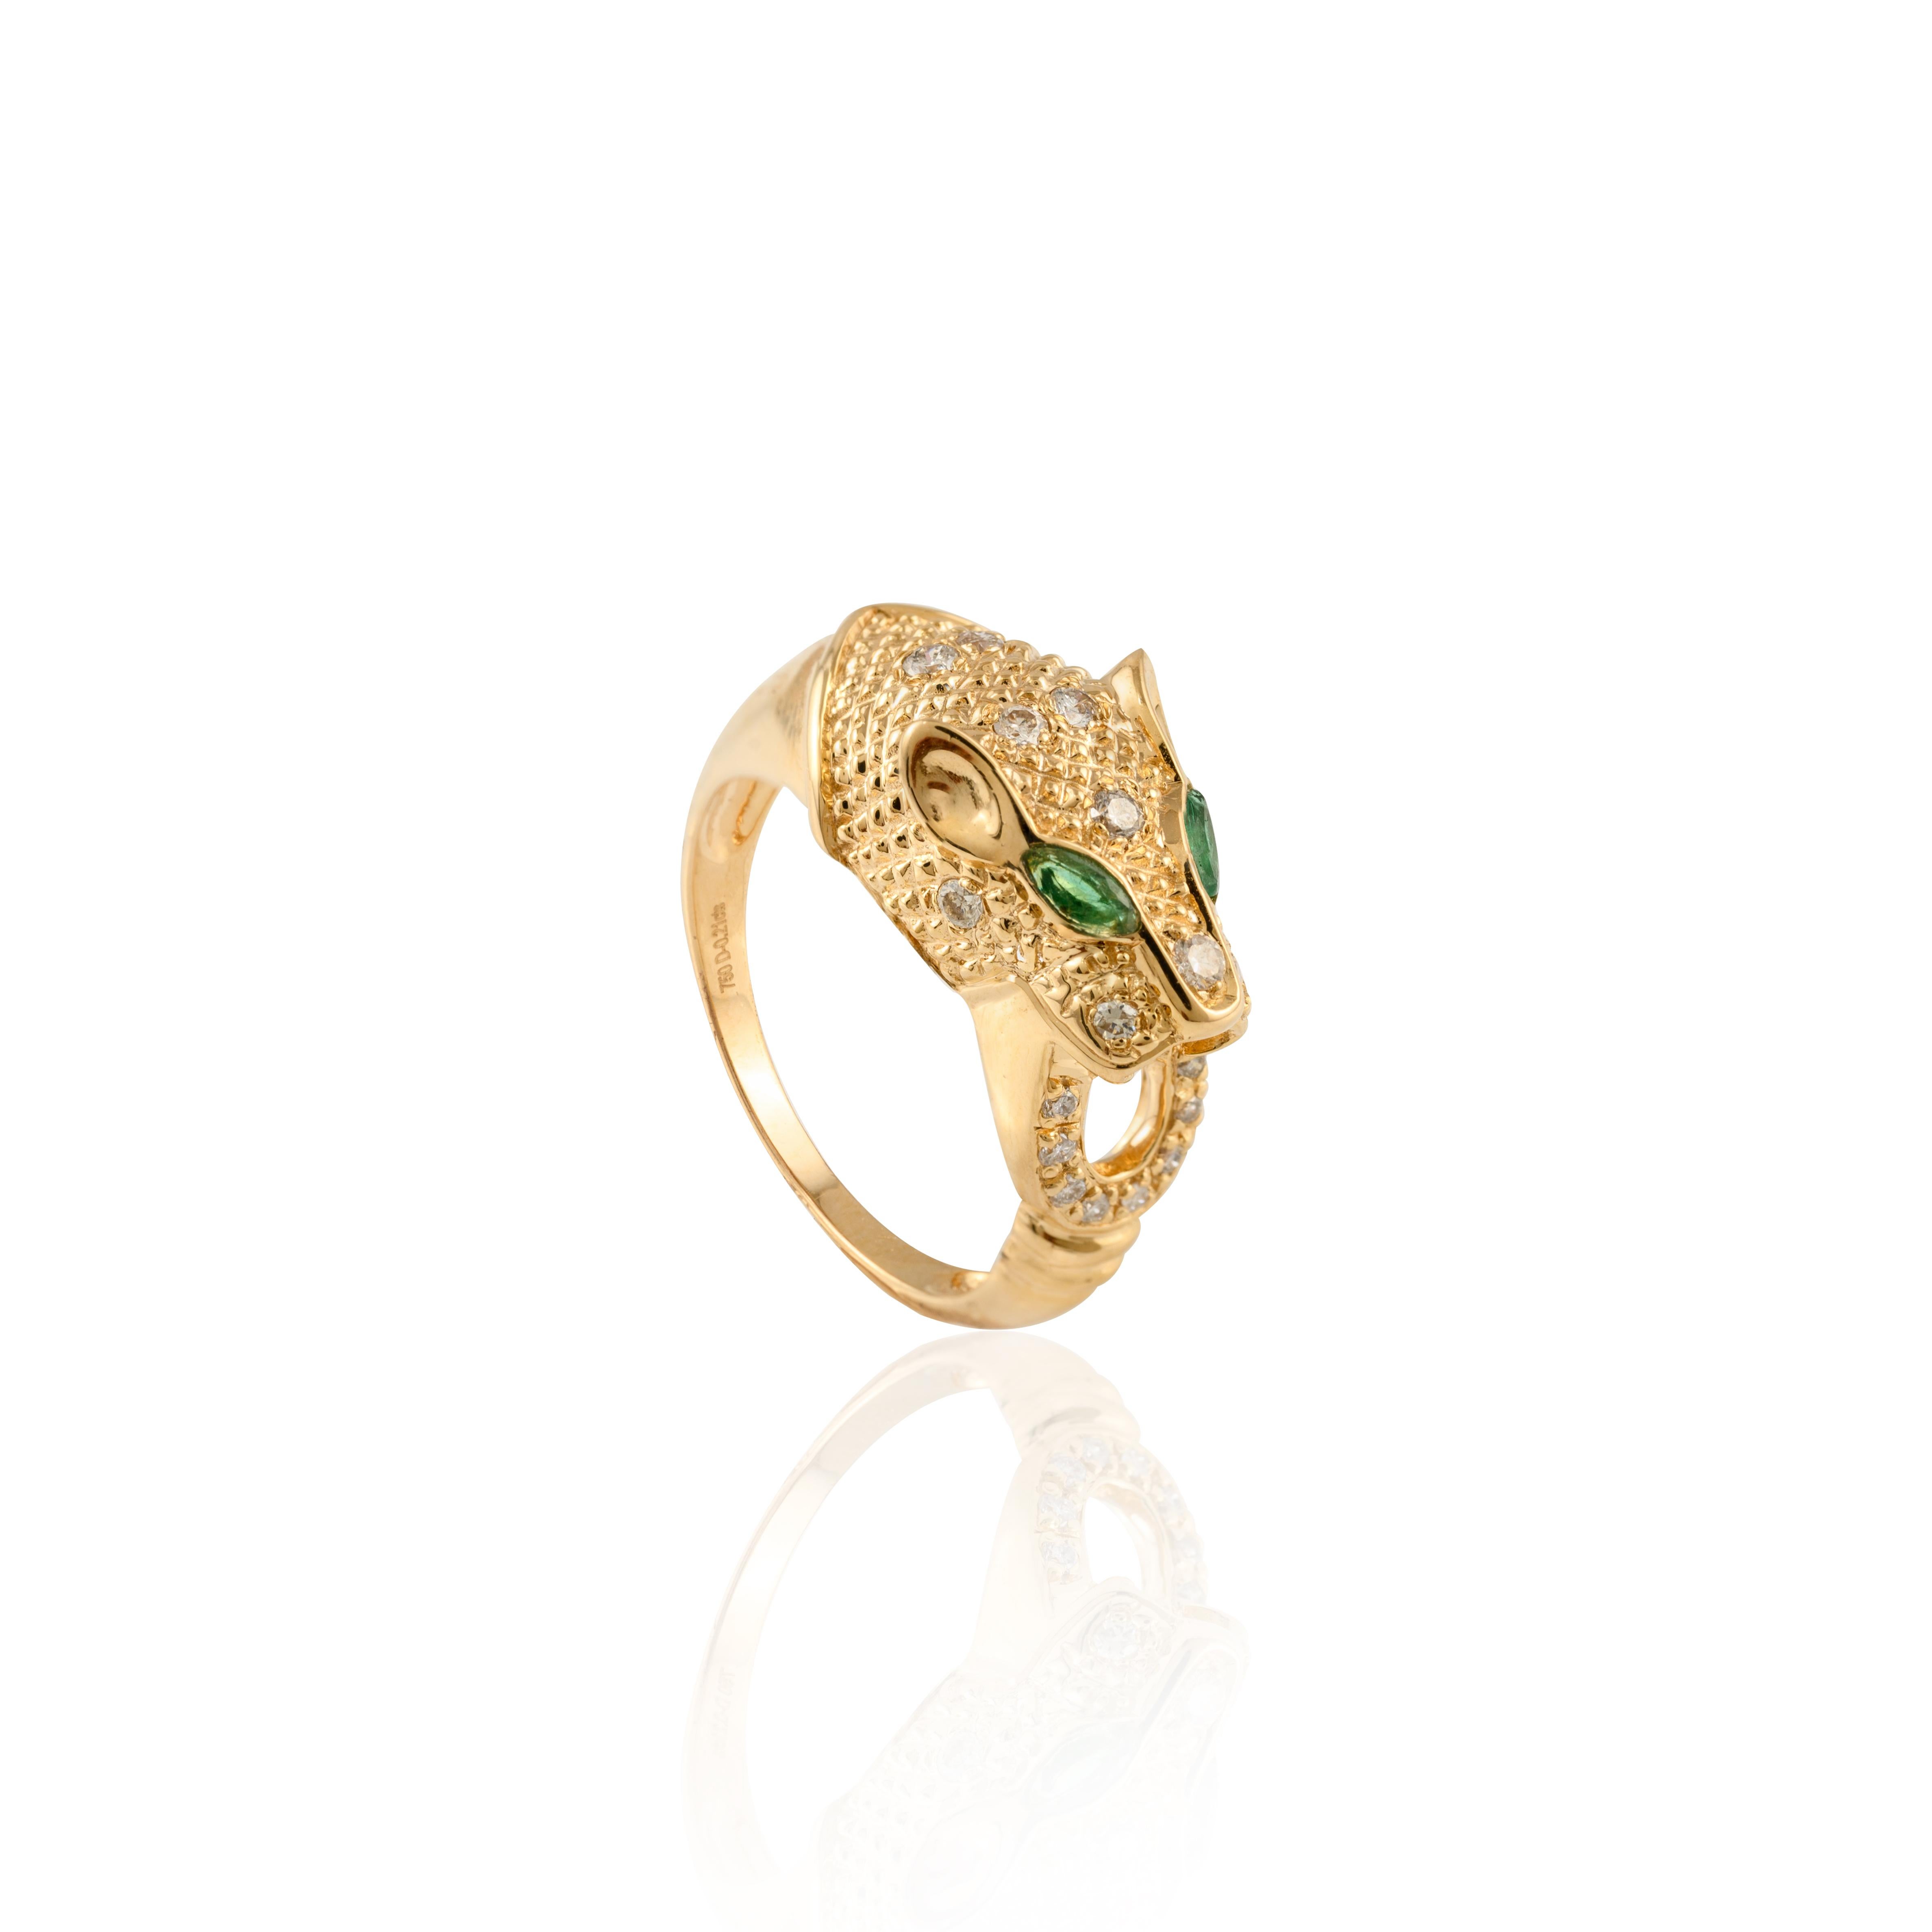 For Sale:  Vintage Panther Head Cocktail Ring Crafted in 18k Solid Yellow Gold 8